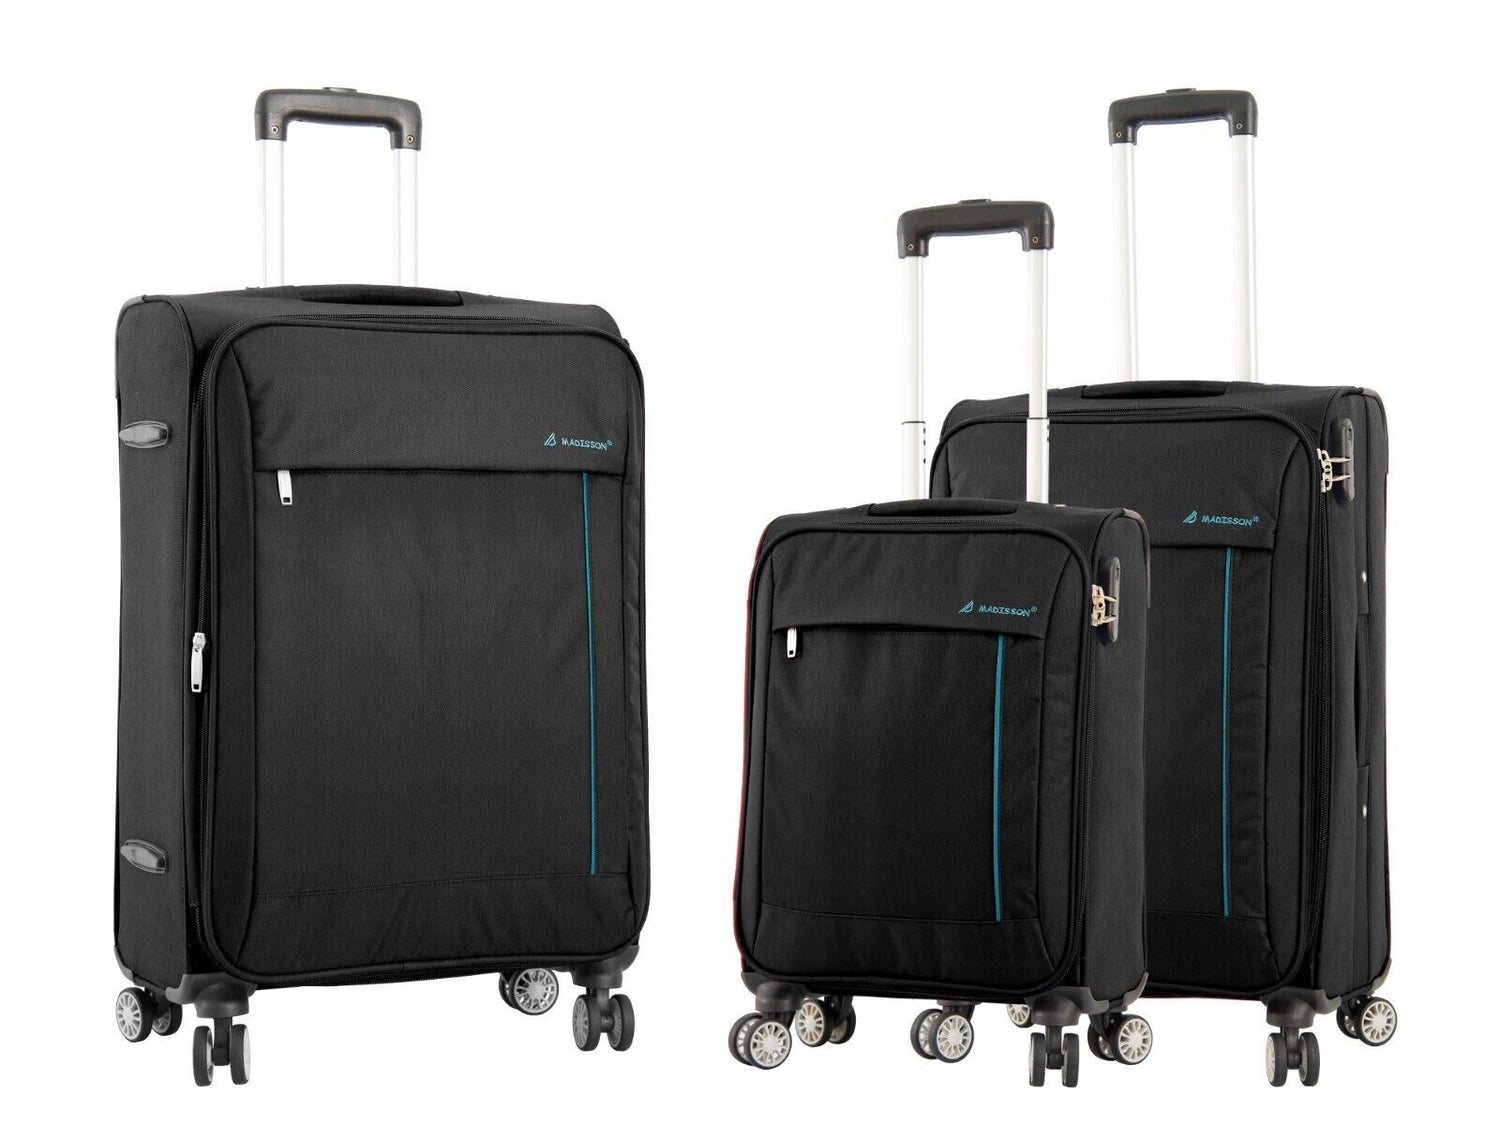 Carrollton Set of 3 Soft Shell Suitcase in Black